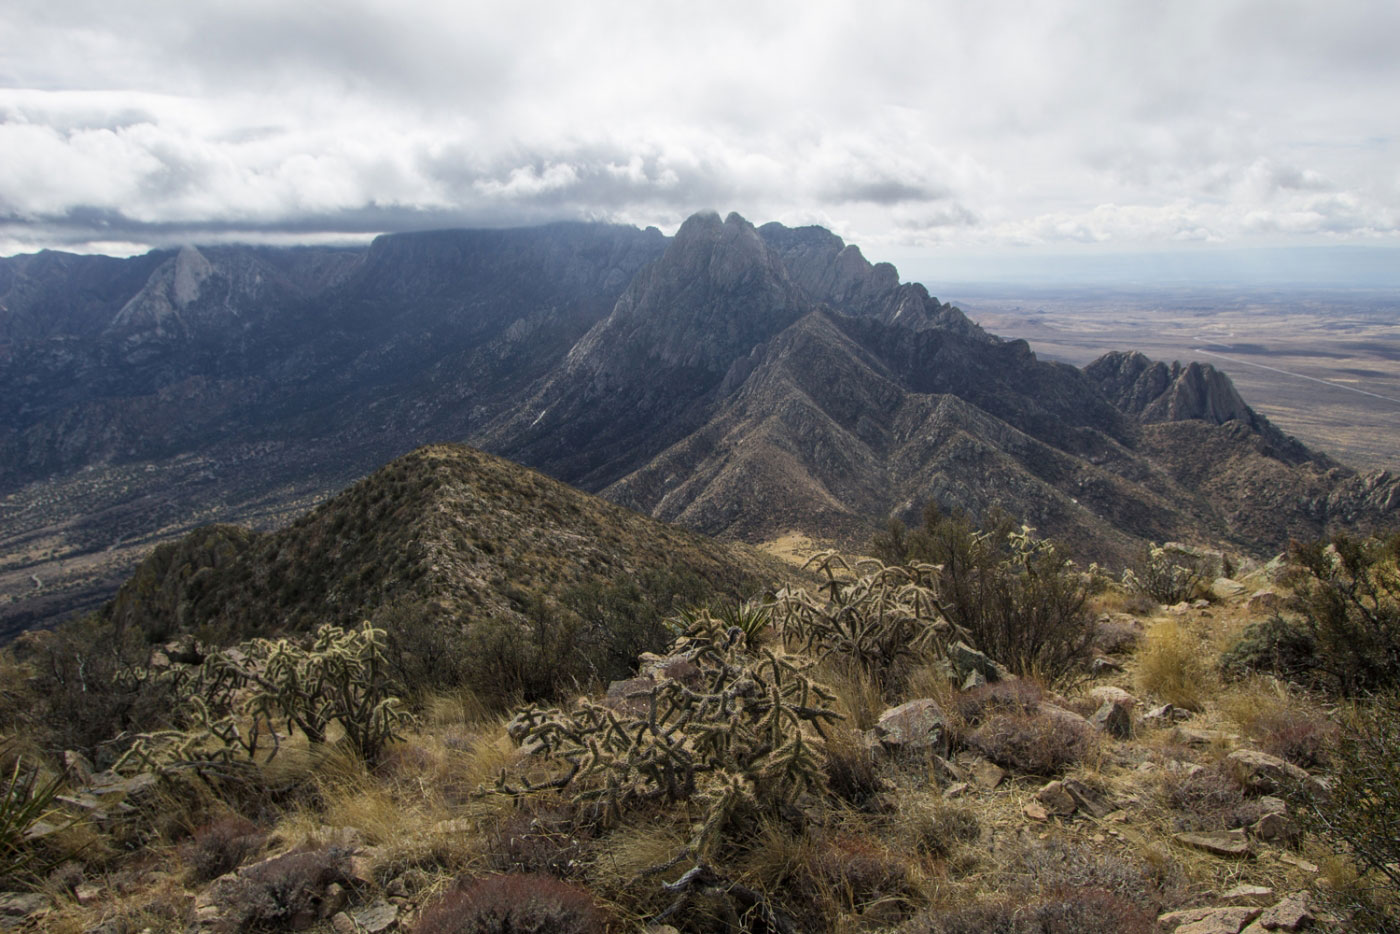 Hike Baylor Peak via Baylor Pass West in Organ Mountains-Desert Peaks National Monument, New Mexico - Stav is Lost